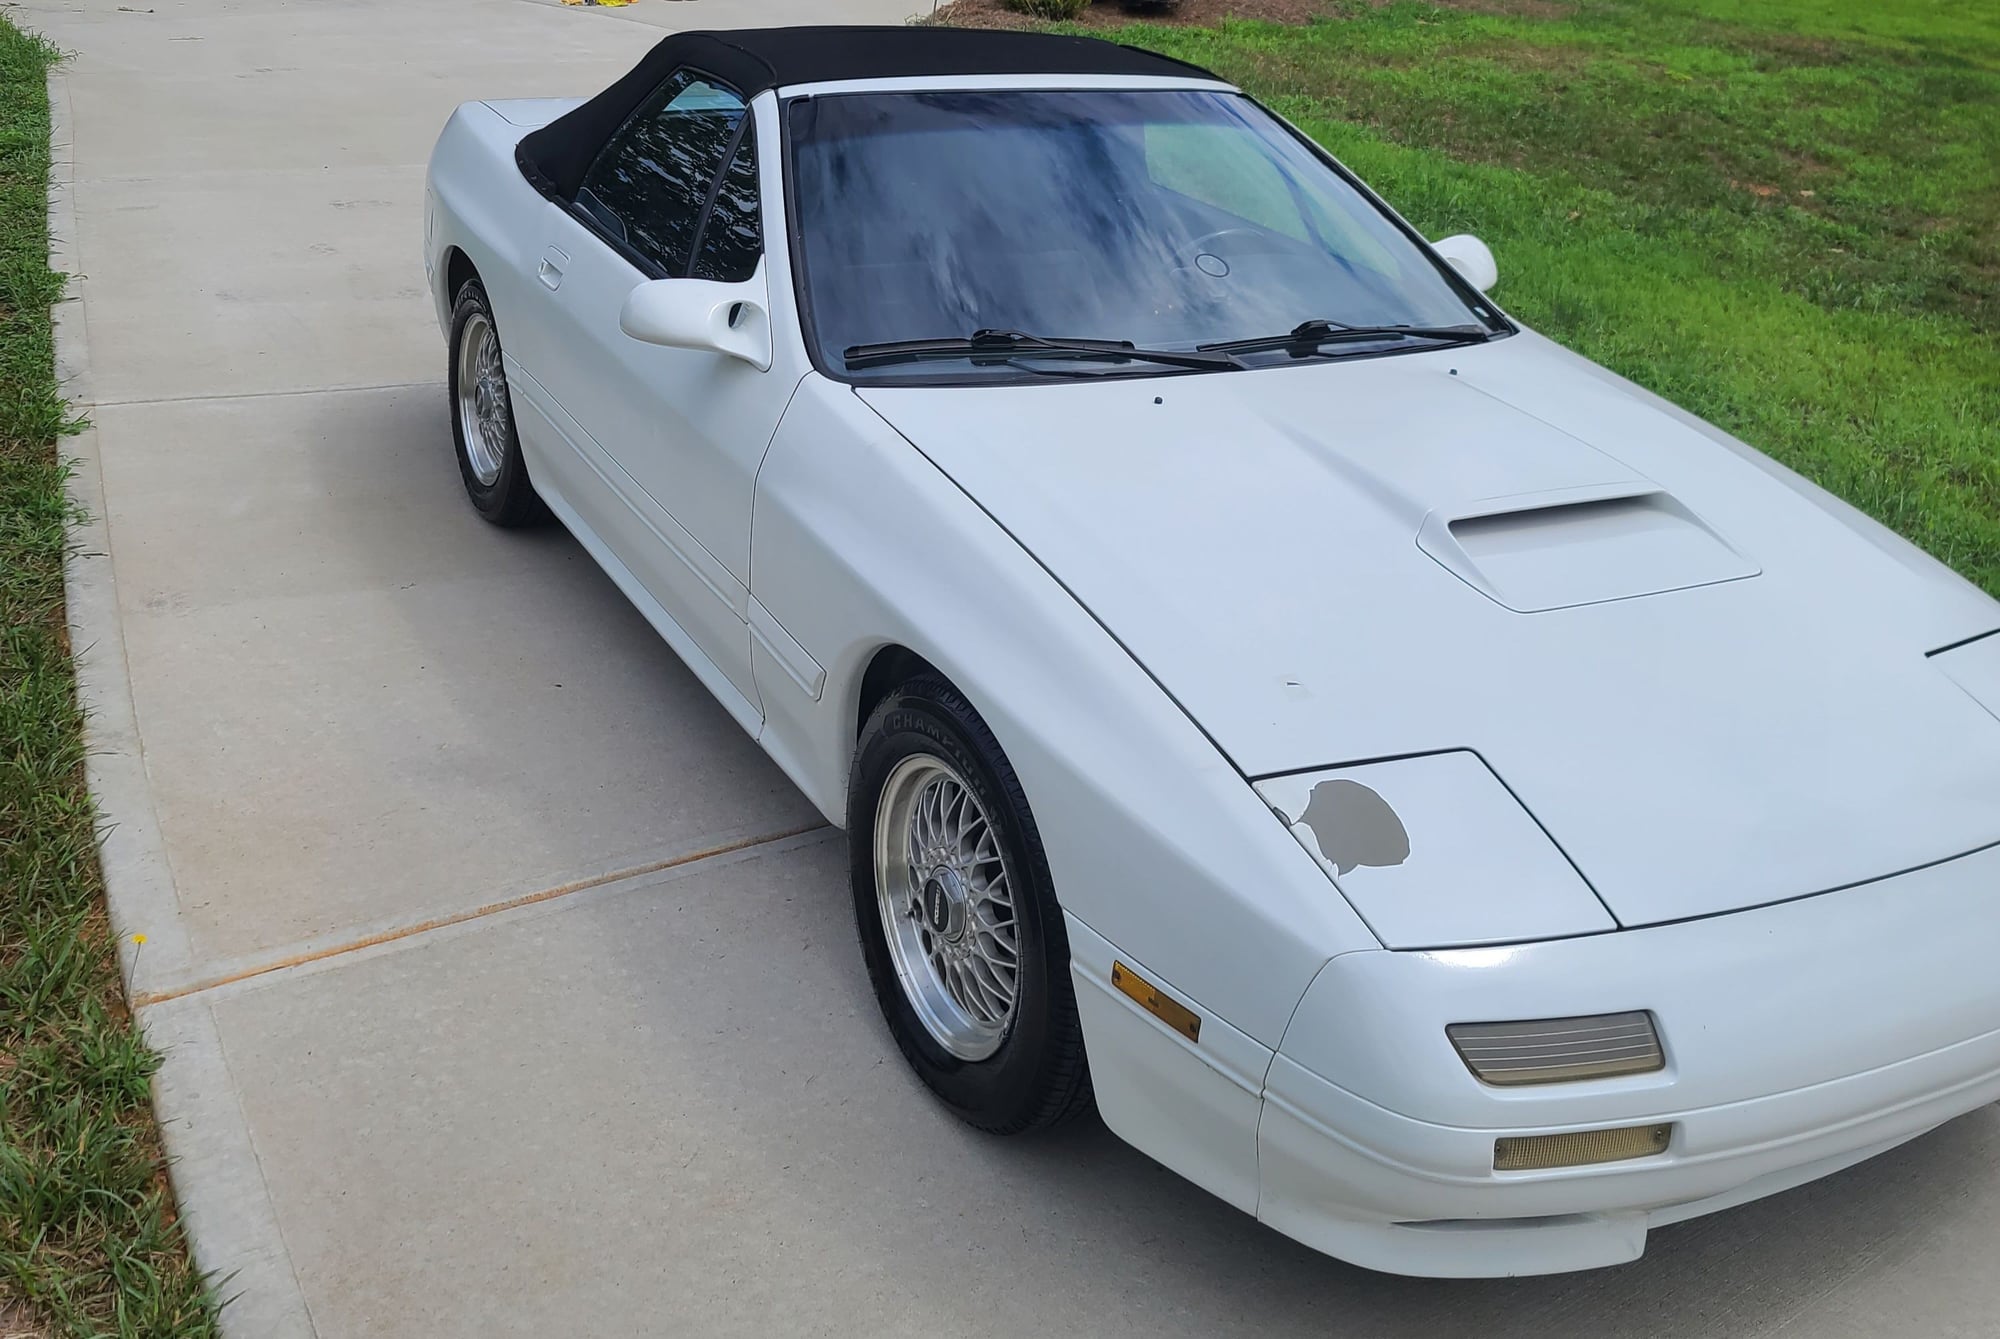 1990 Mazda RX-7 - Garage Kept RX-7 - Used - VIN JM1FC3527L0713107 - 122,000 Miles - 2 cyl - 2WD - Manual - Convertible - White - Concord, NC 28027, United States